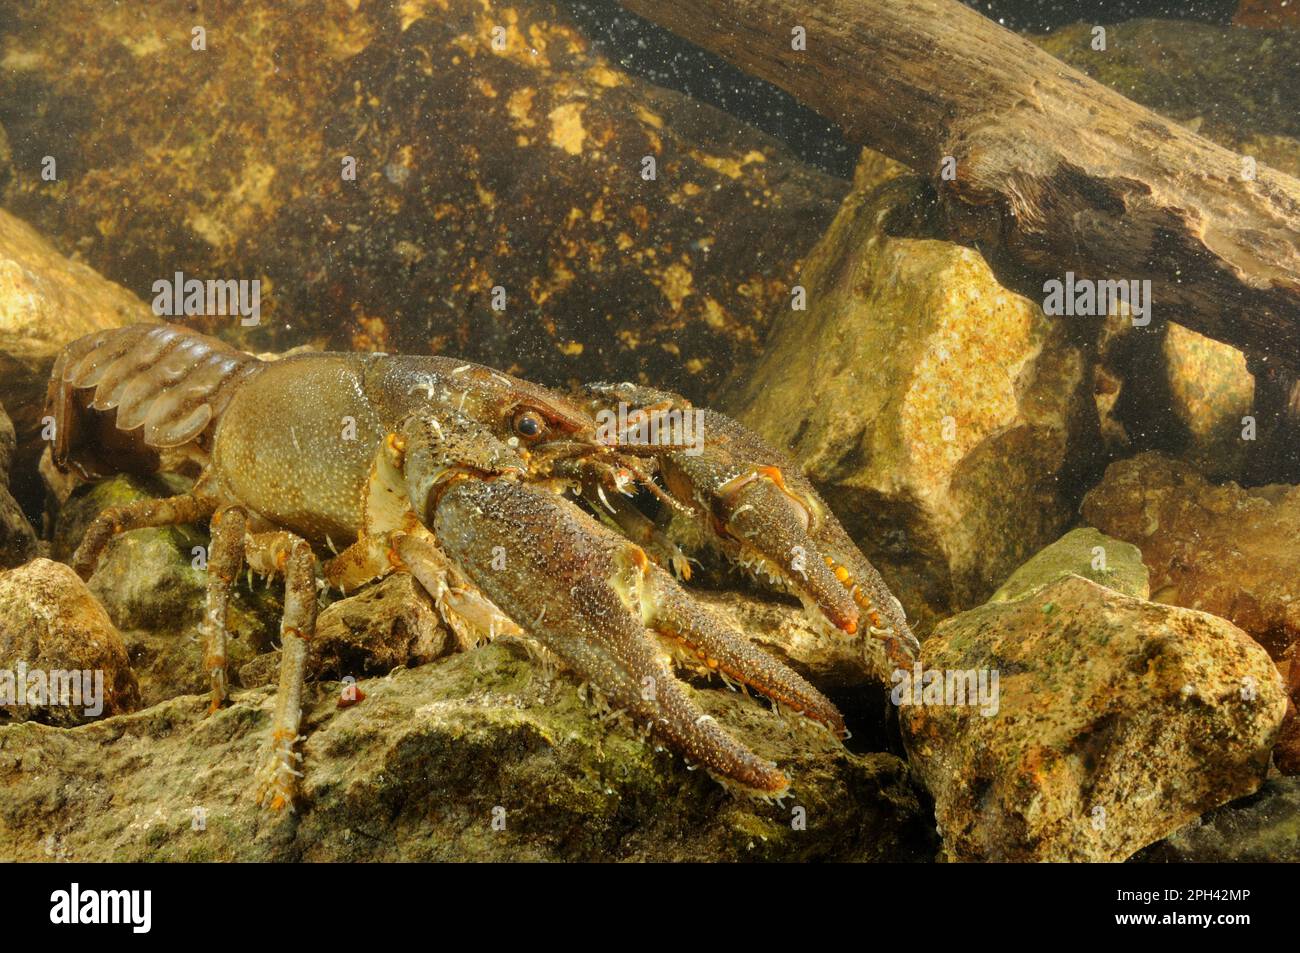 White-clawed Freshwater Crayfish (Austropotamobius italicus) adult male, with with Parasitic Annelid (Branchiobdella astaci) ectoparasites attached Stock Photo